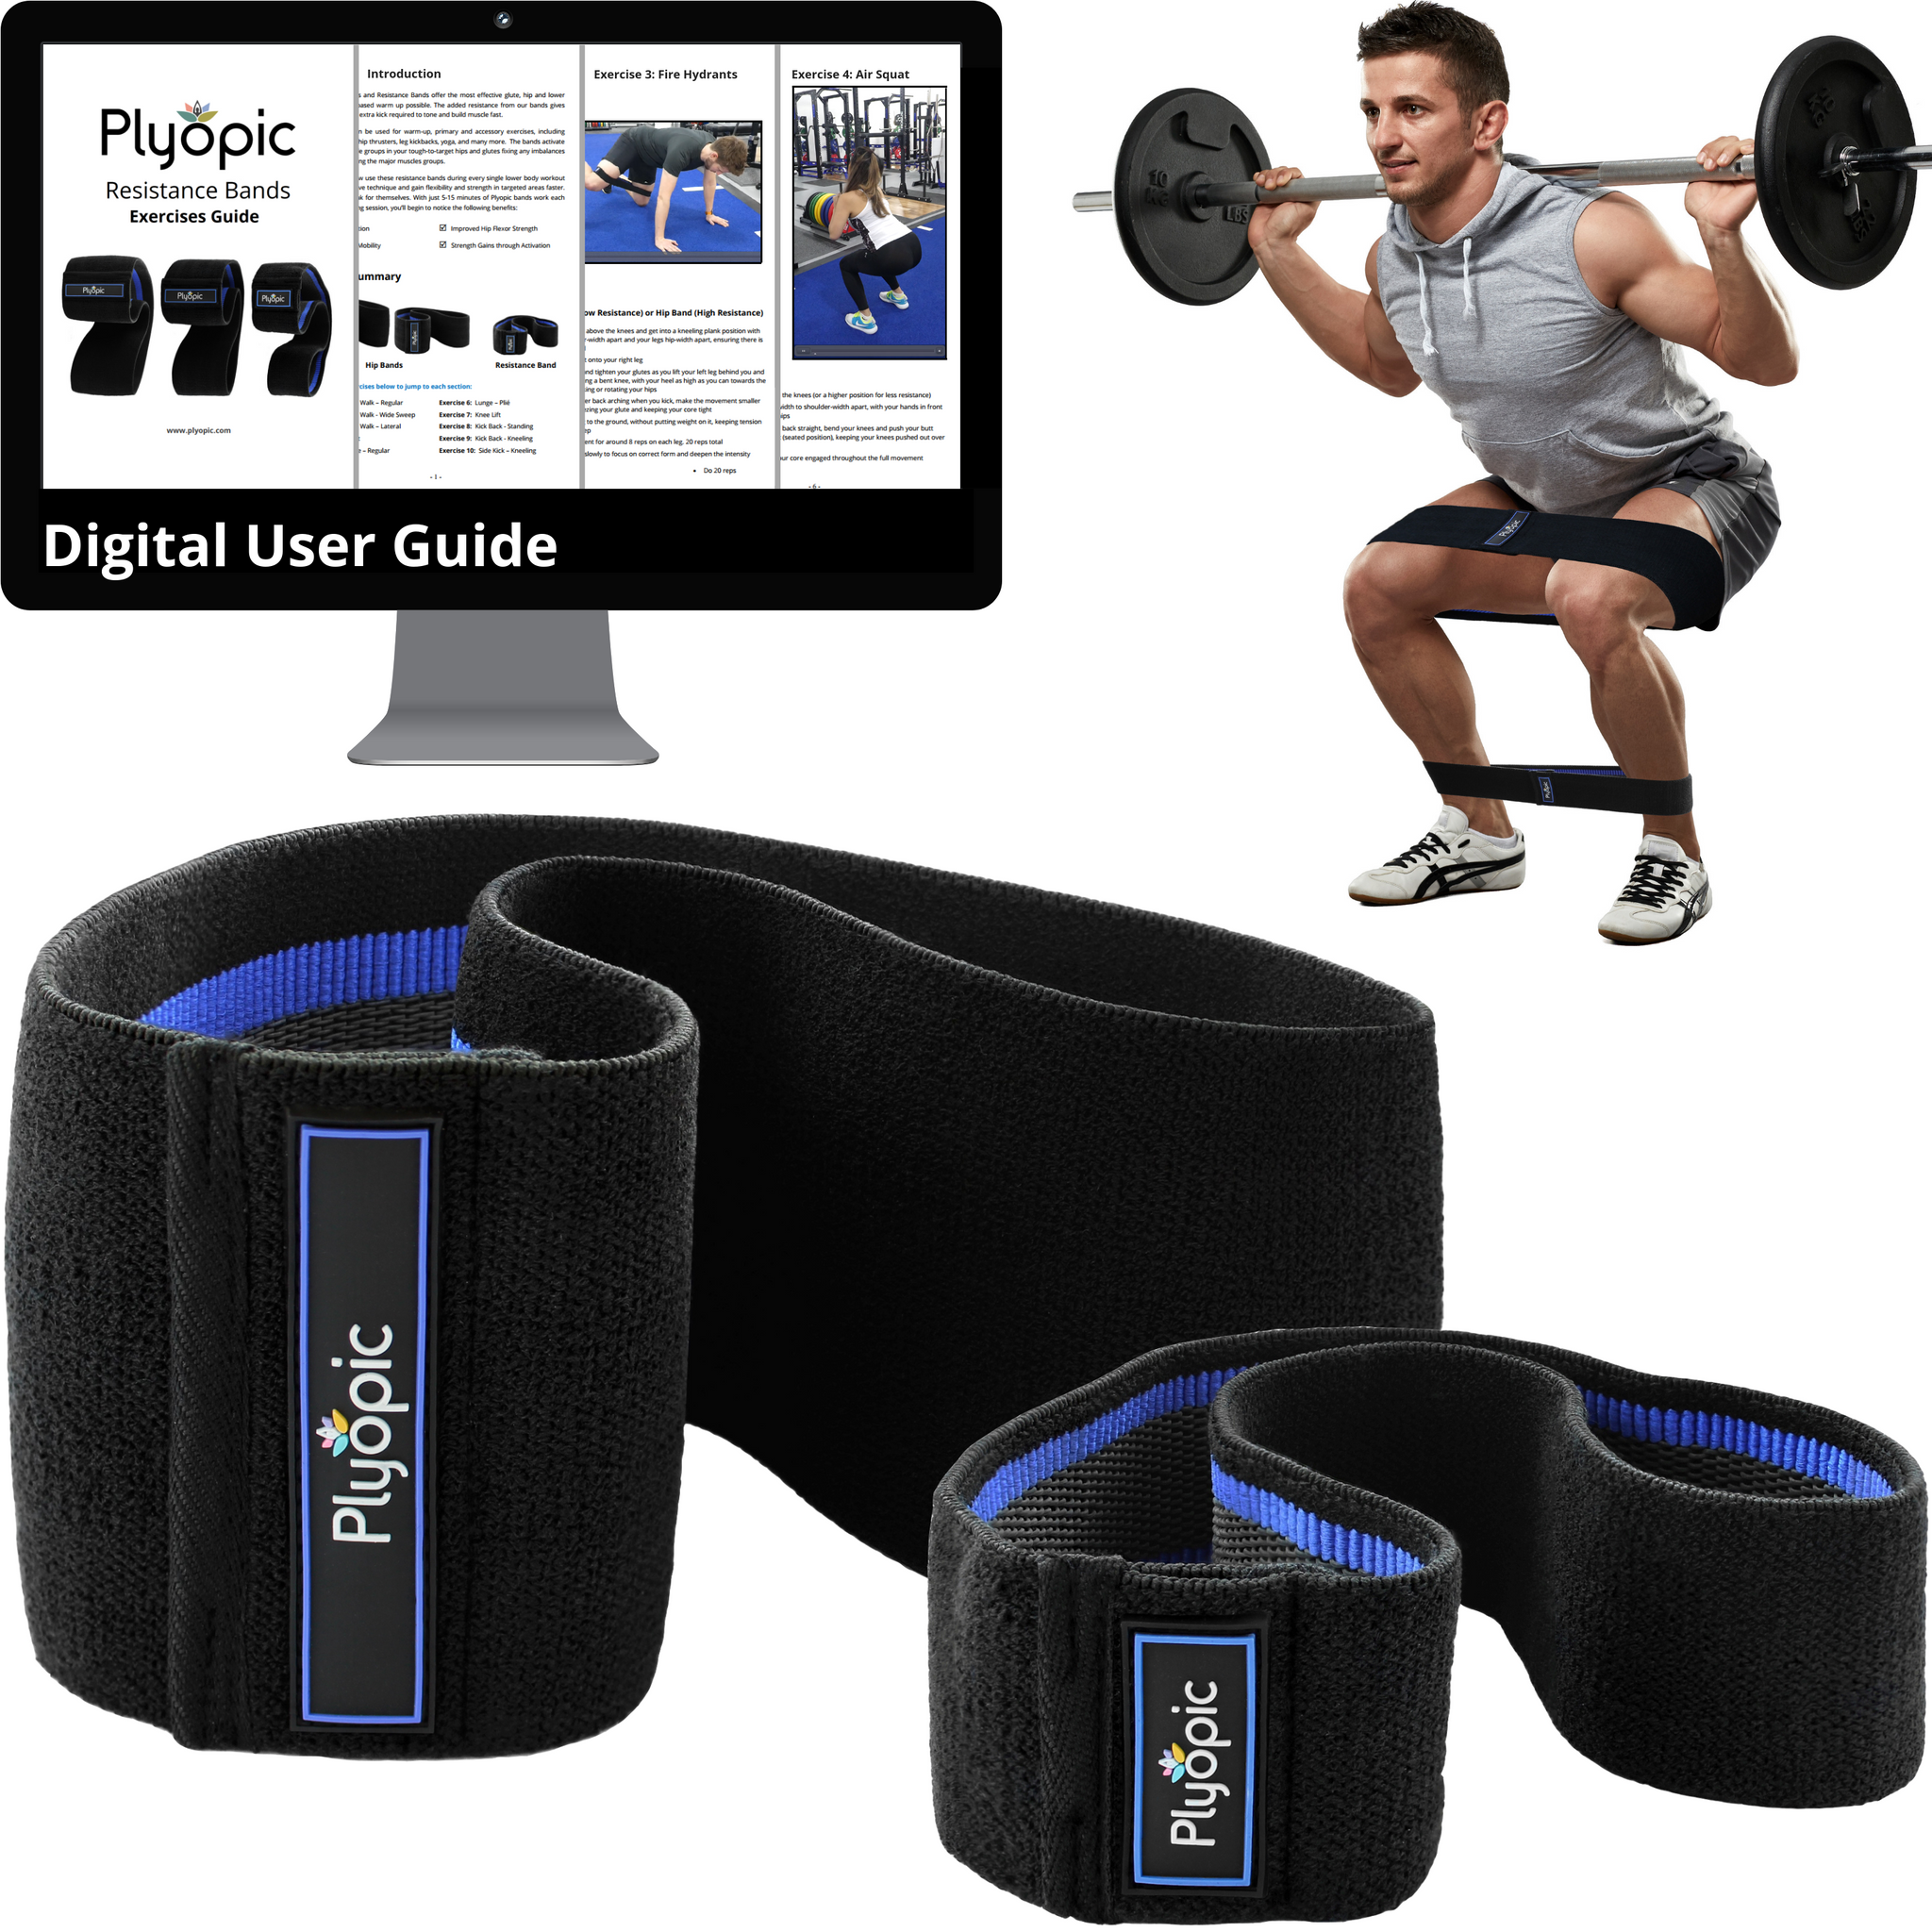 Plyopic-Men's Hip Resistance Band Set (For Upper & Lower Legs)-Hip Resistance and Mini Bands Digital User Guide and Resistance Bands Worn on Man Lifting Weights